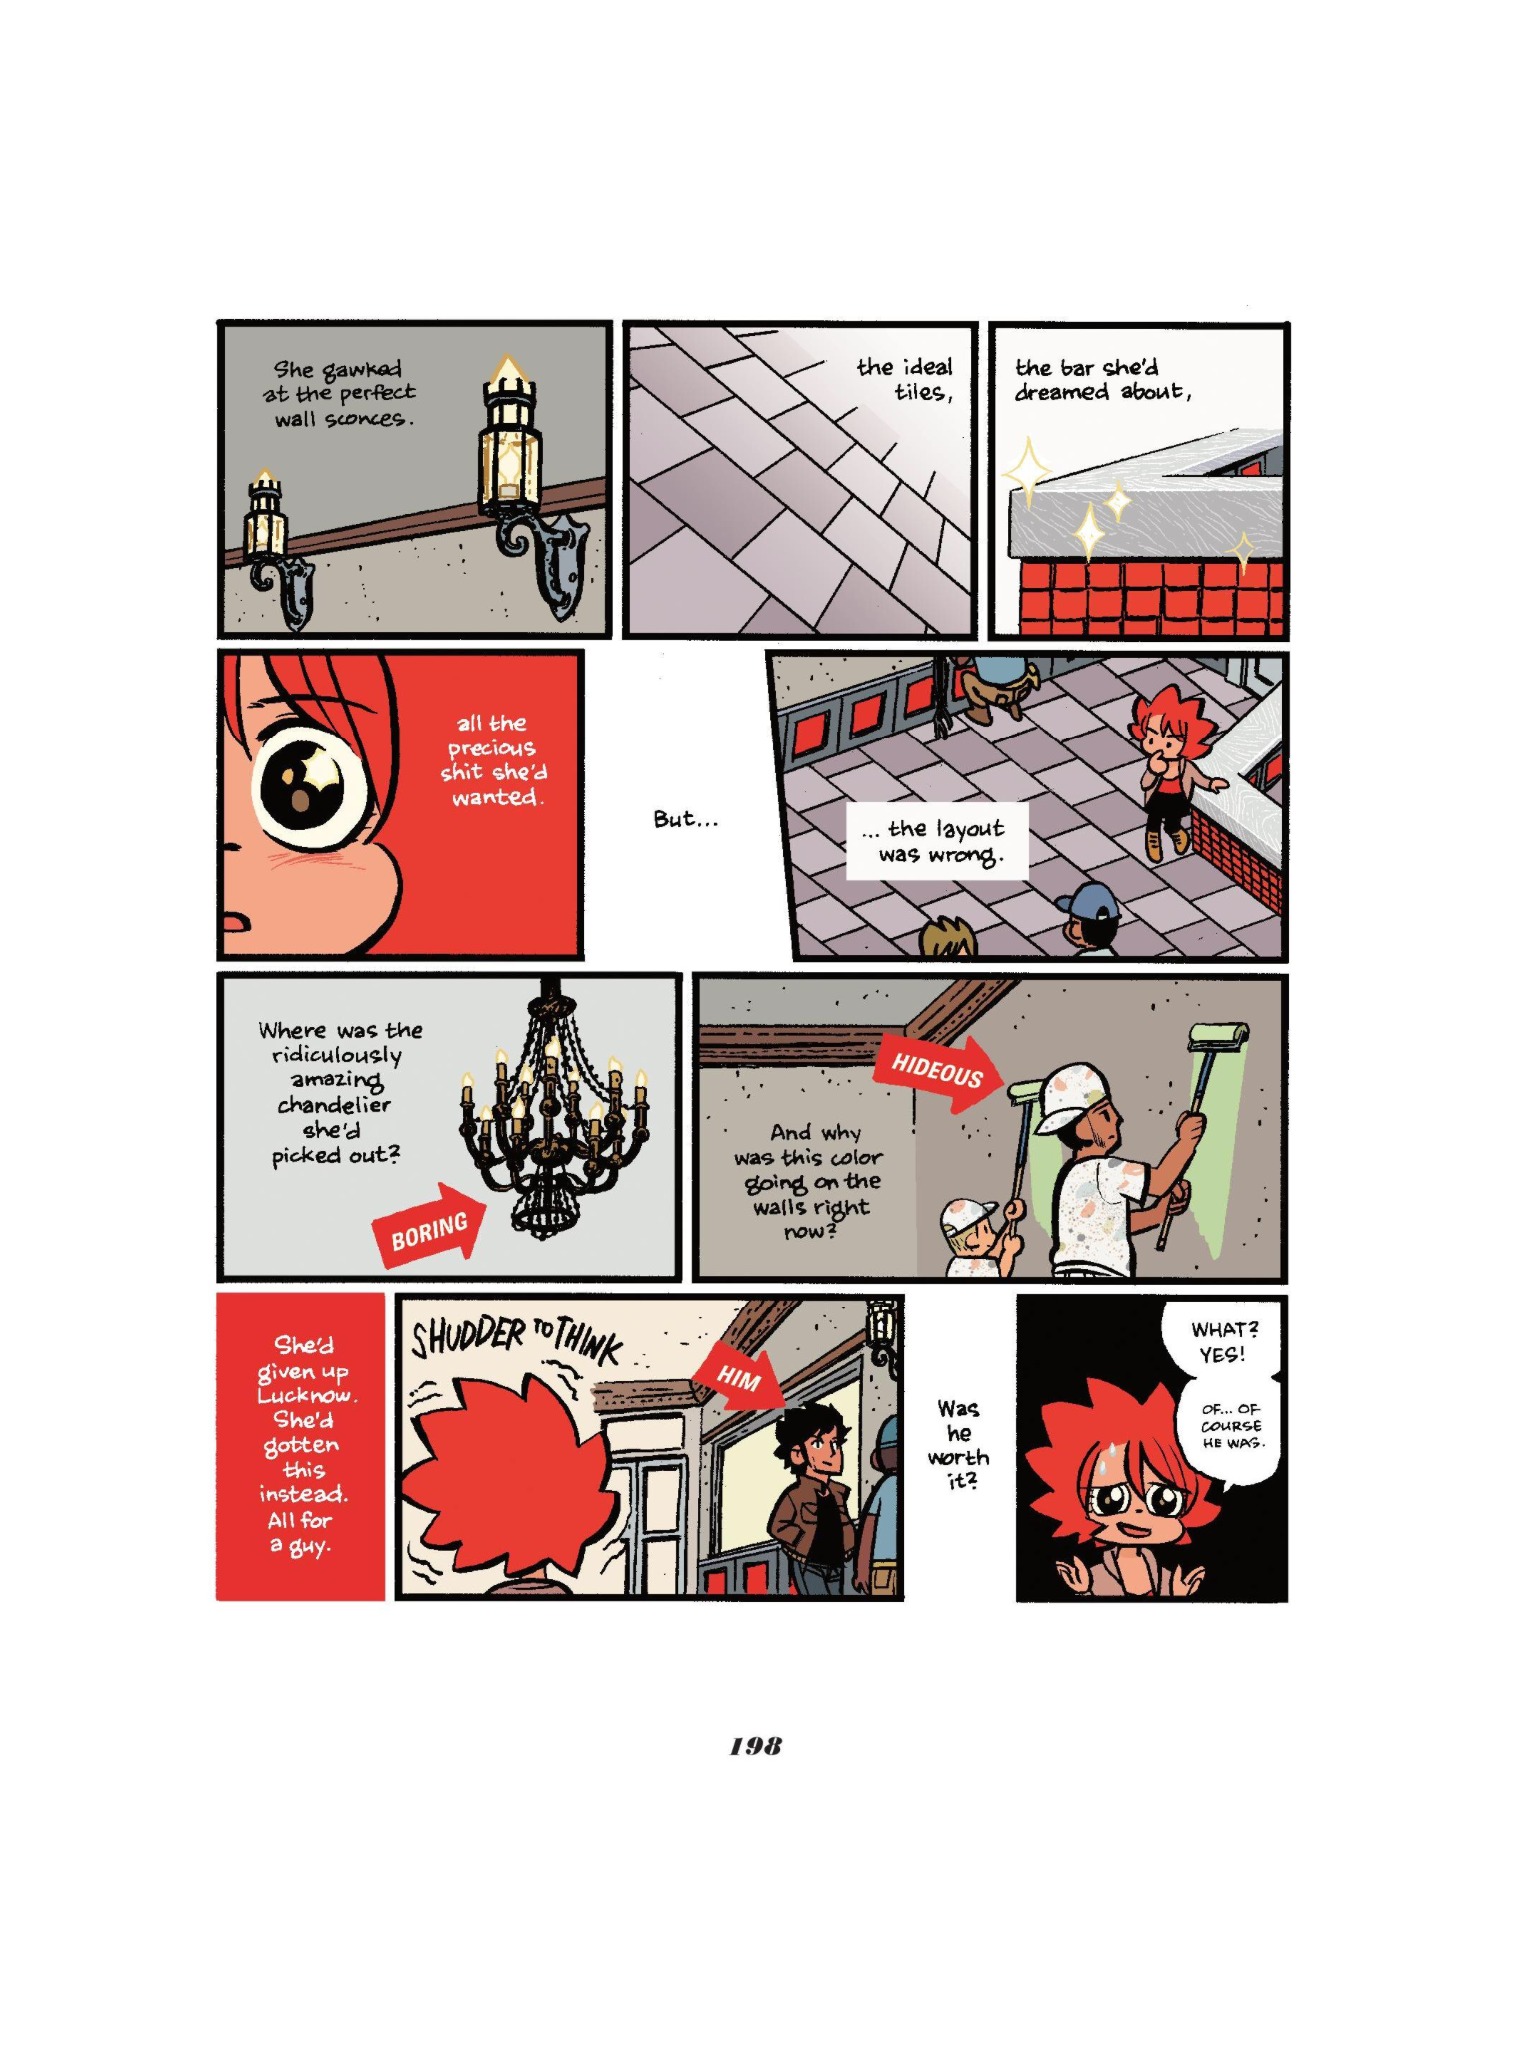 Read online Seconds comic -  Issue # Full - 199